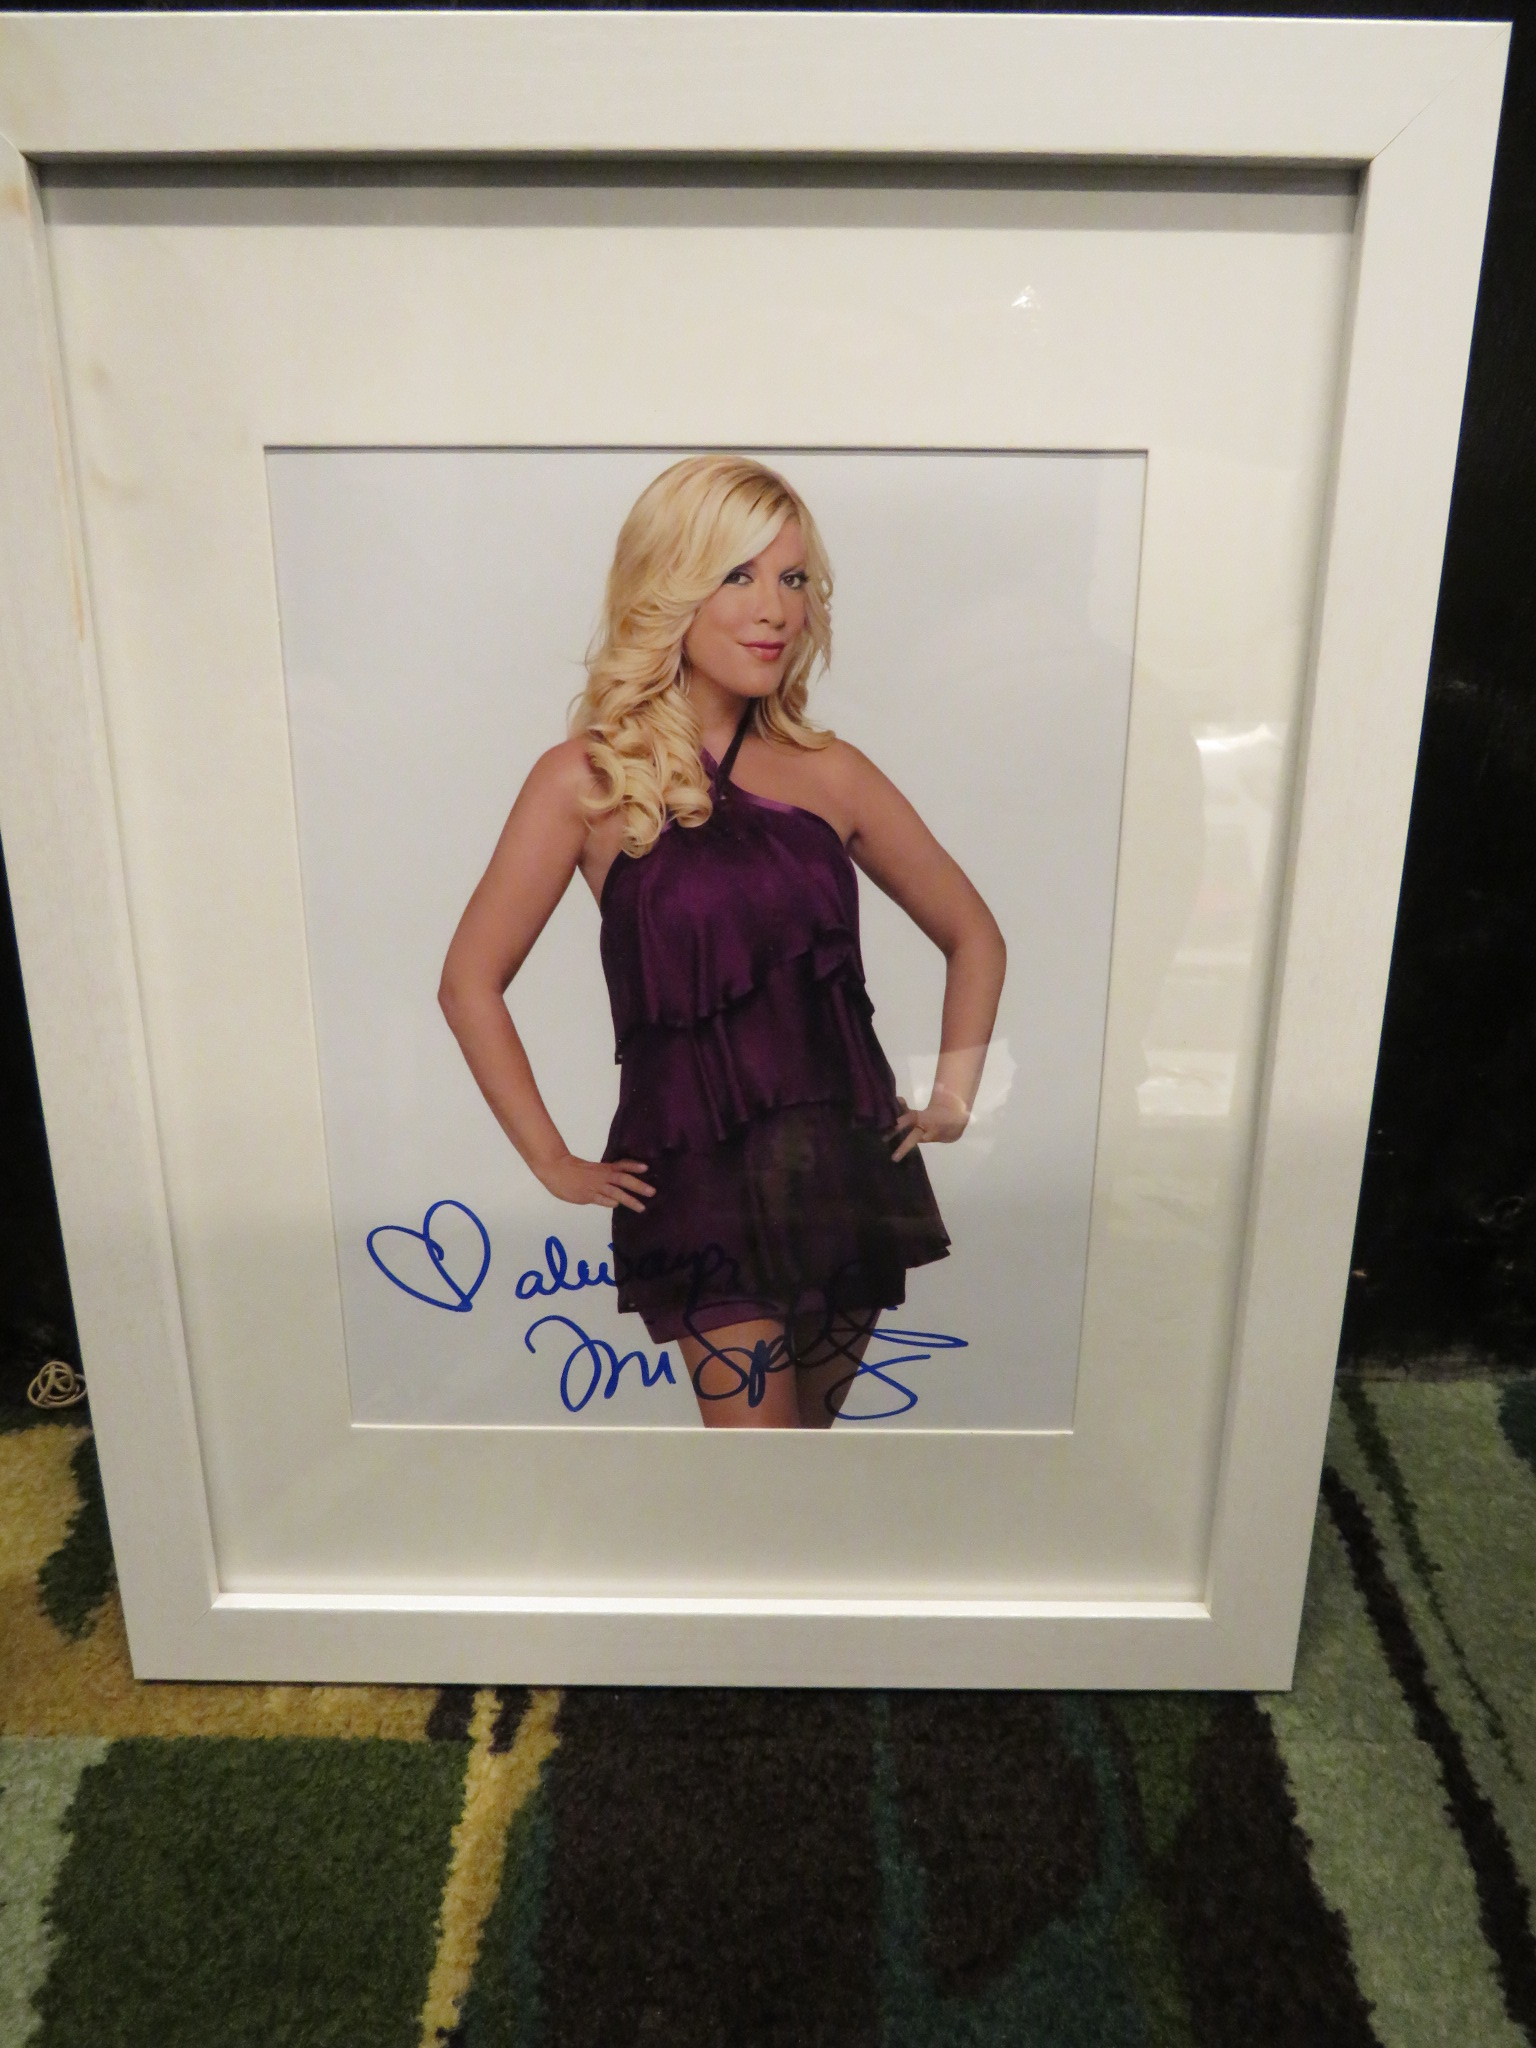 0th Image of a N/A TORI SPELLING SIGNED